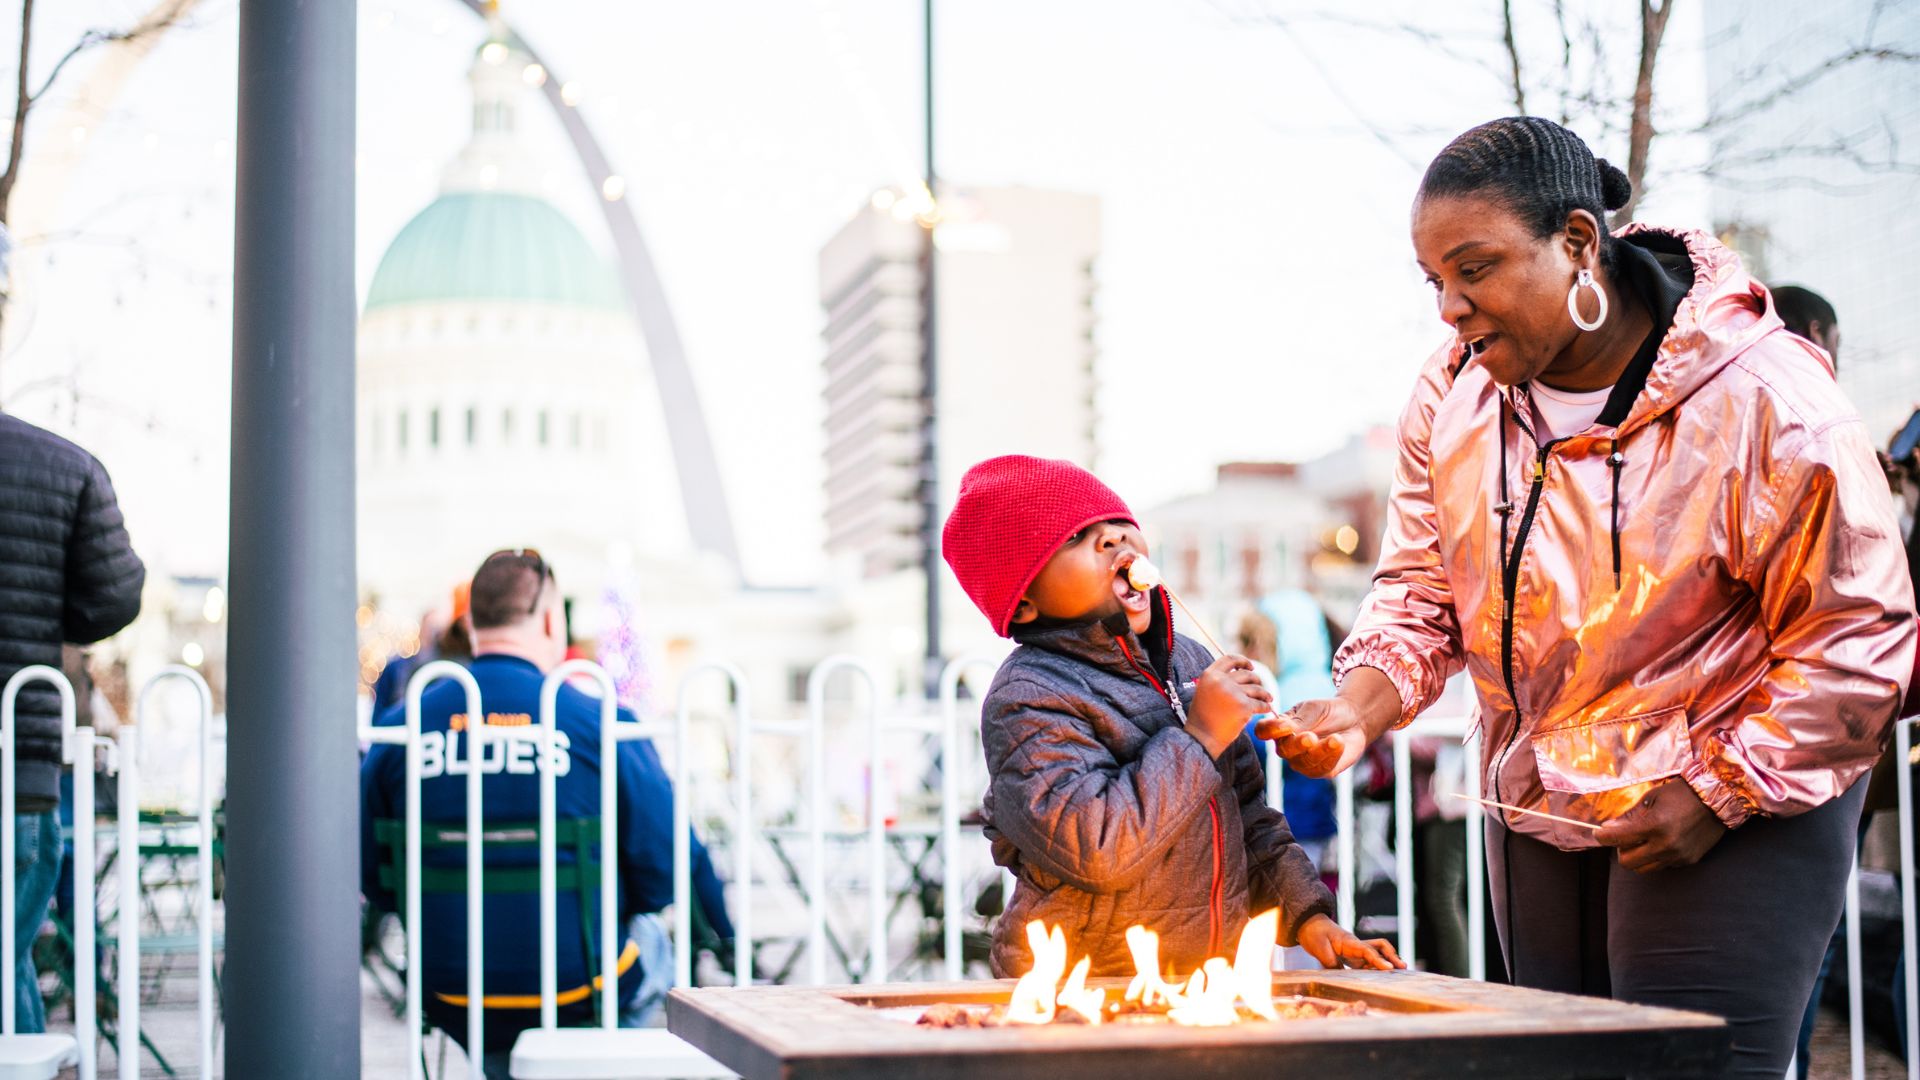 A family roasts marshmallows in downtown St. Louis during Winterfest.